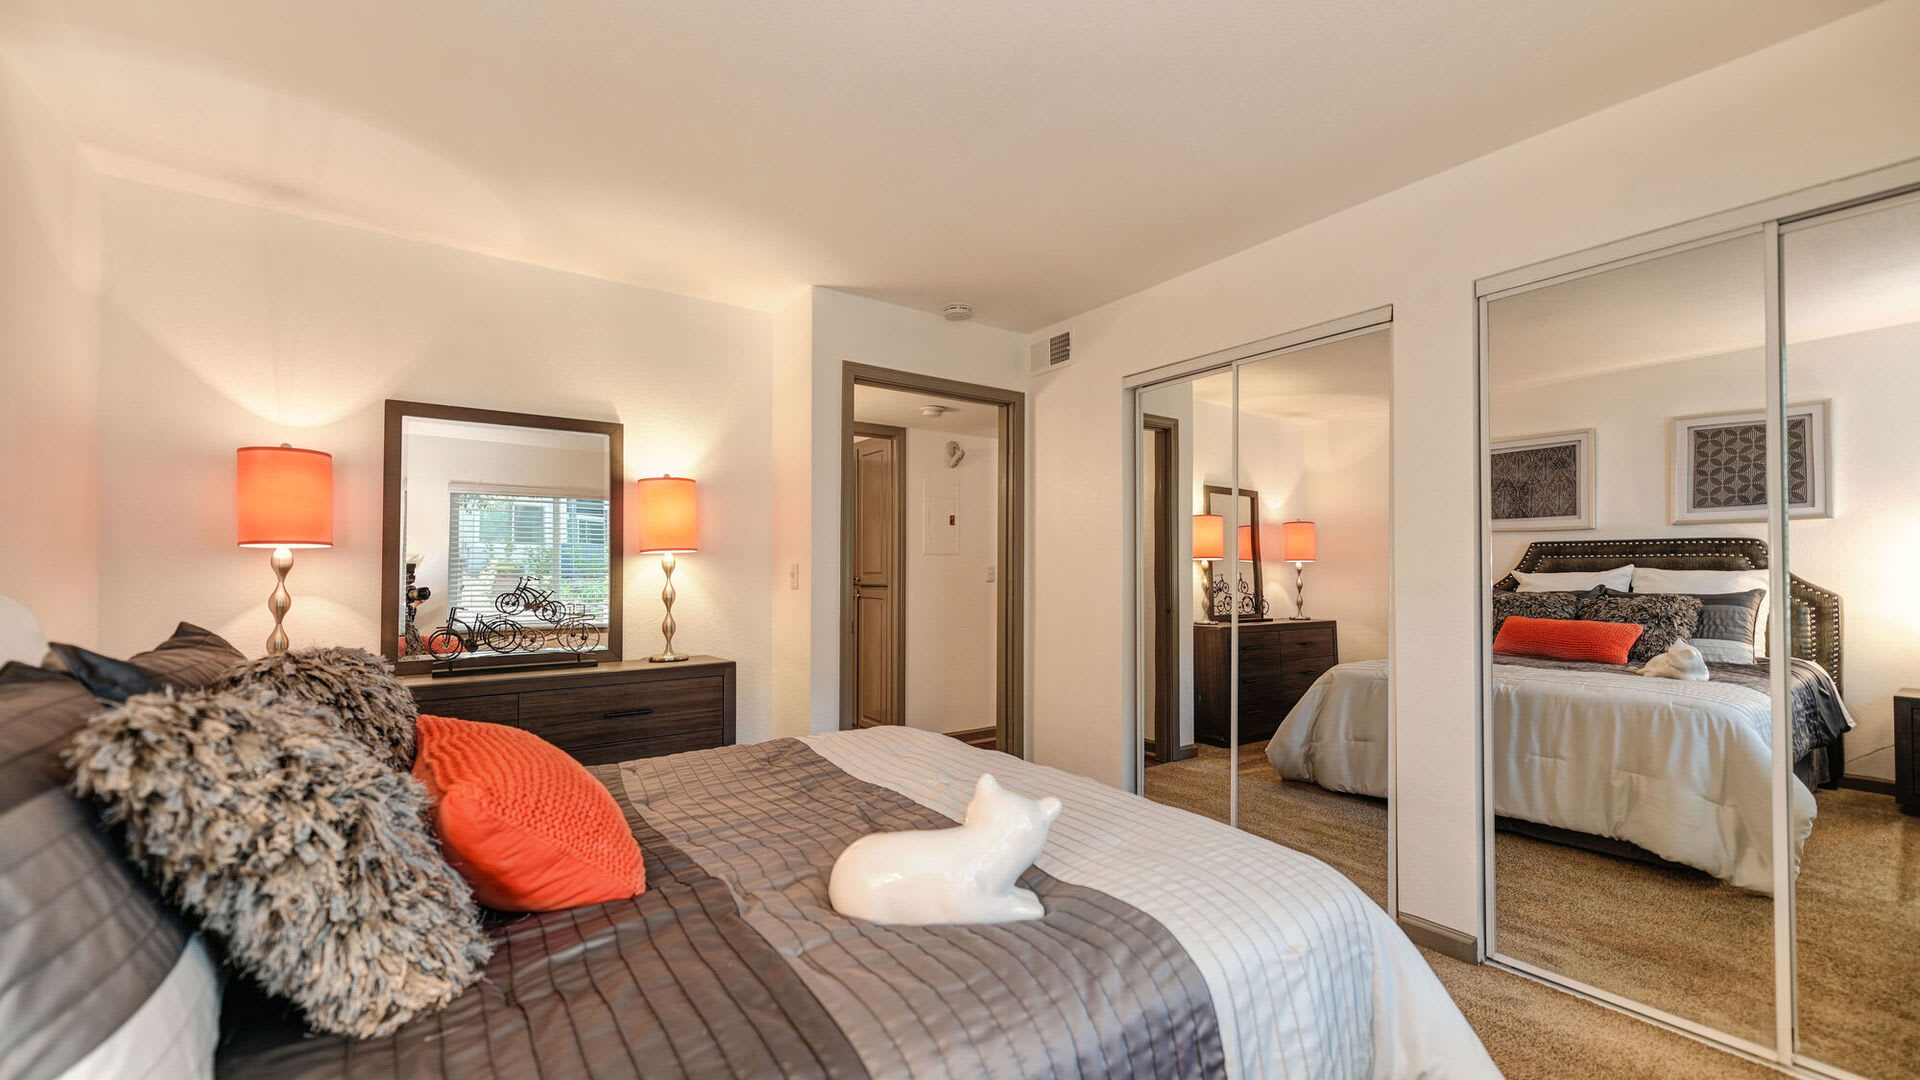 Master bedroom at Lake Pointe Apartments in Folsom, California